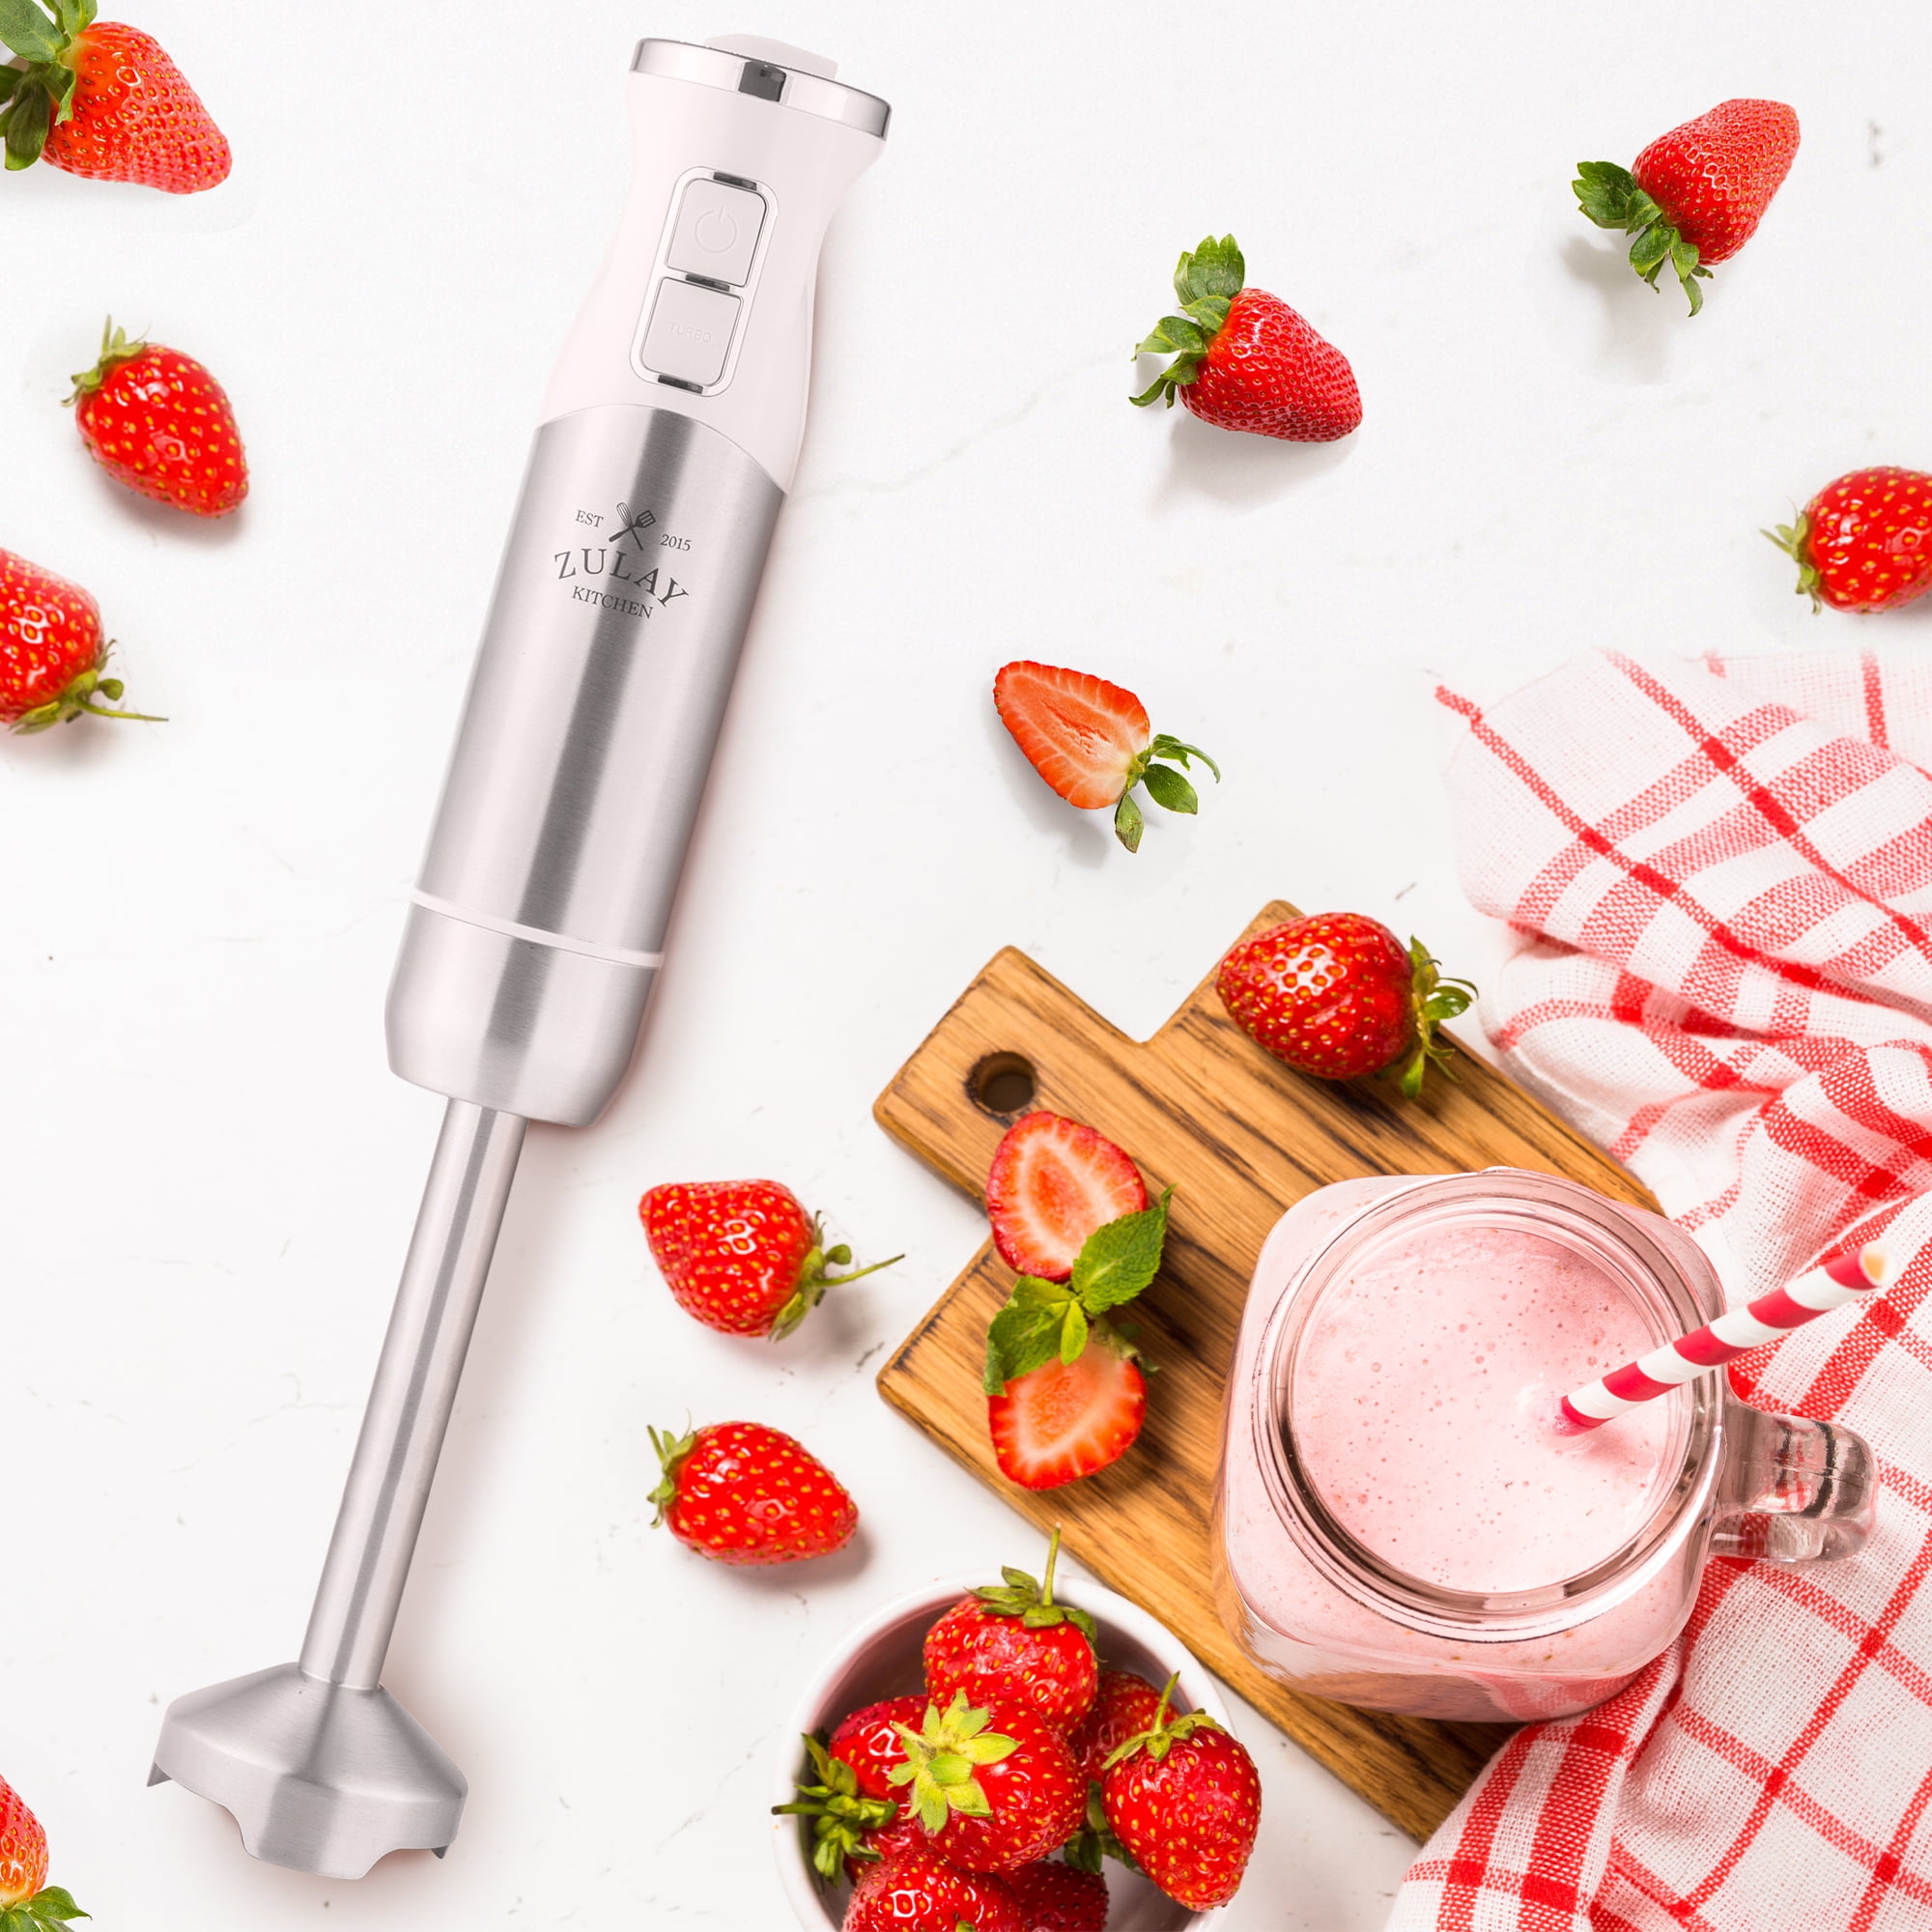 Zulay Kitchen Immersion Hand Blender 500W - Red, 1 - Fry's Food Stores